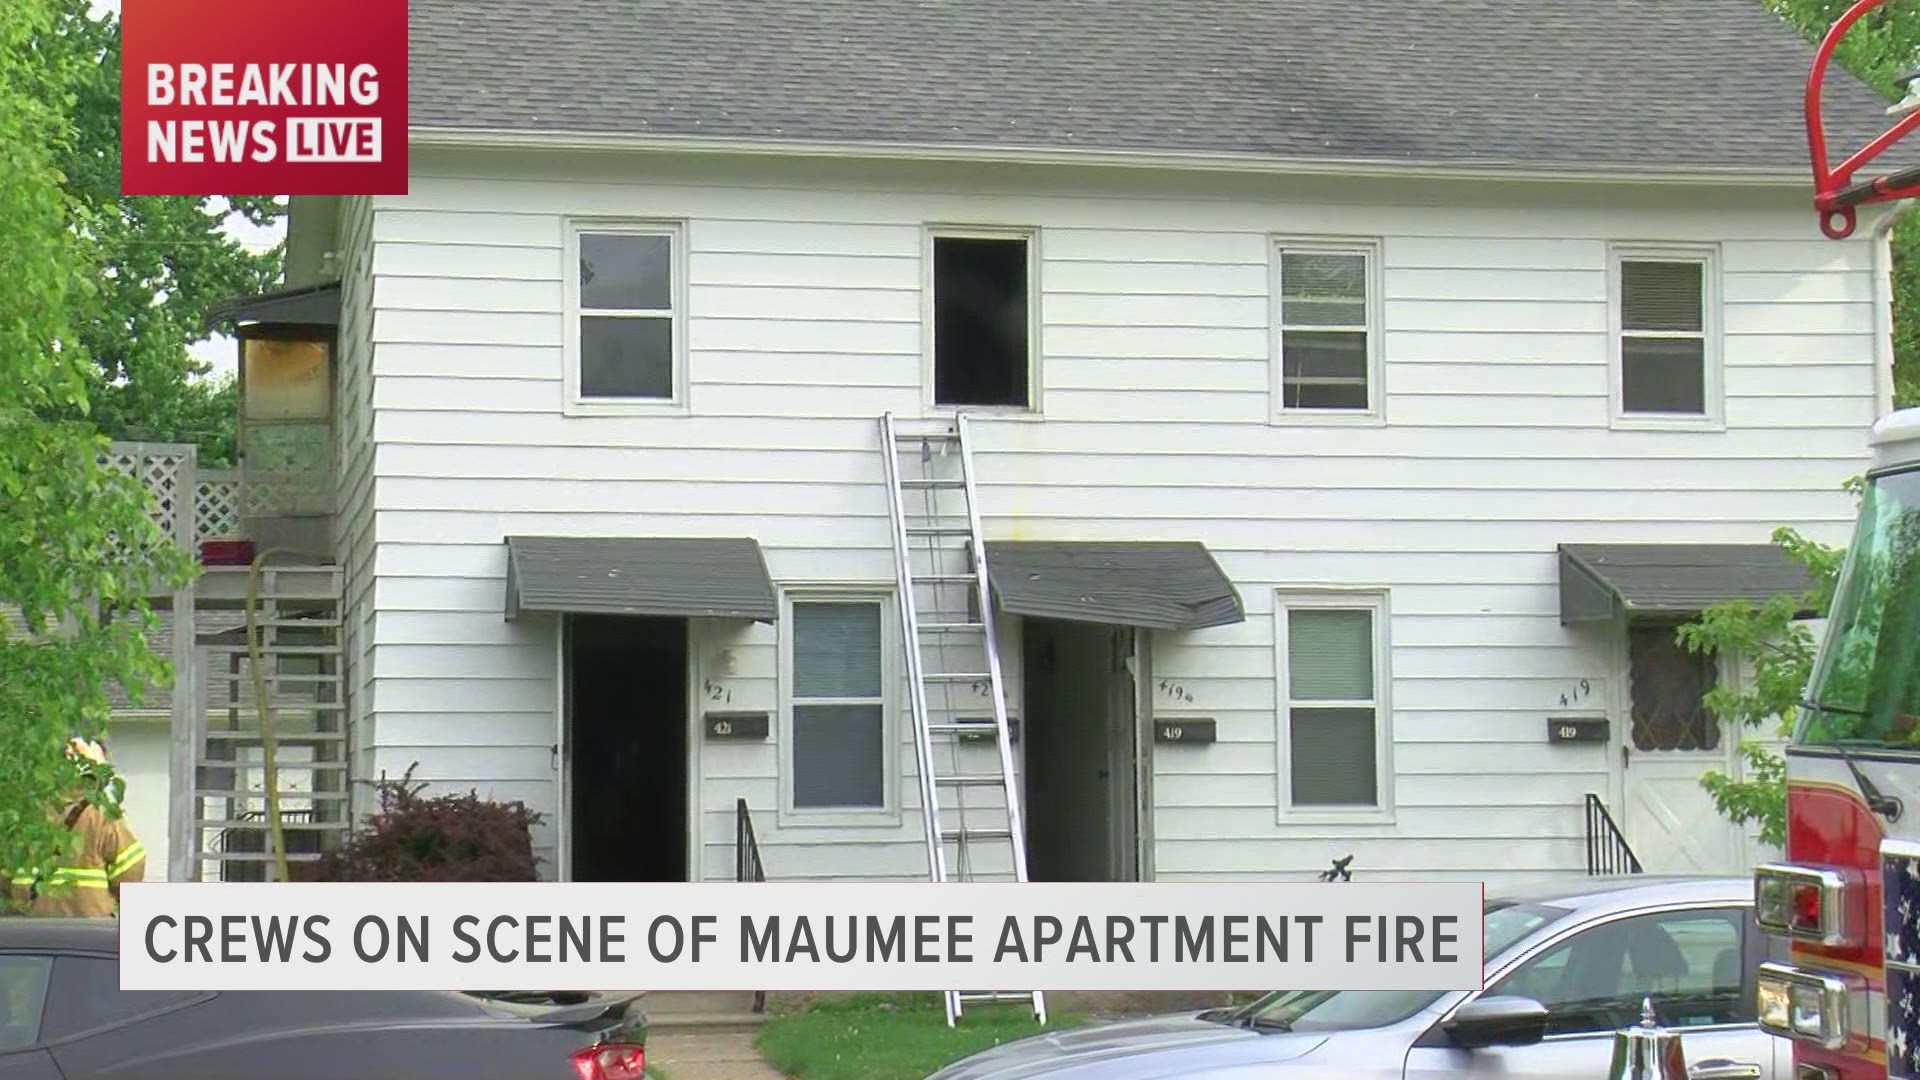 Three other people were also in the apartment at the time of the fire, but they were able to get out safely.